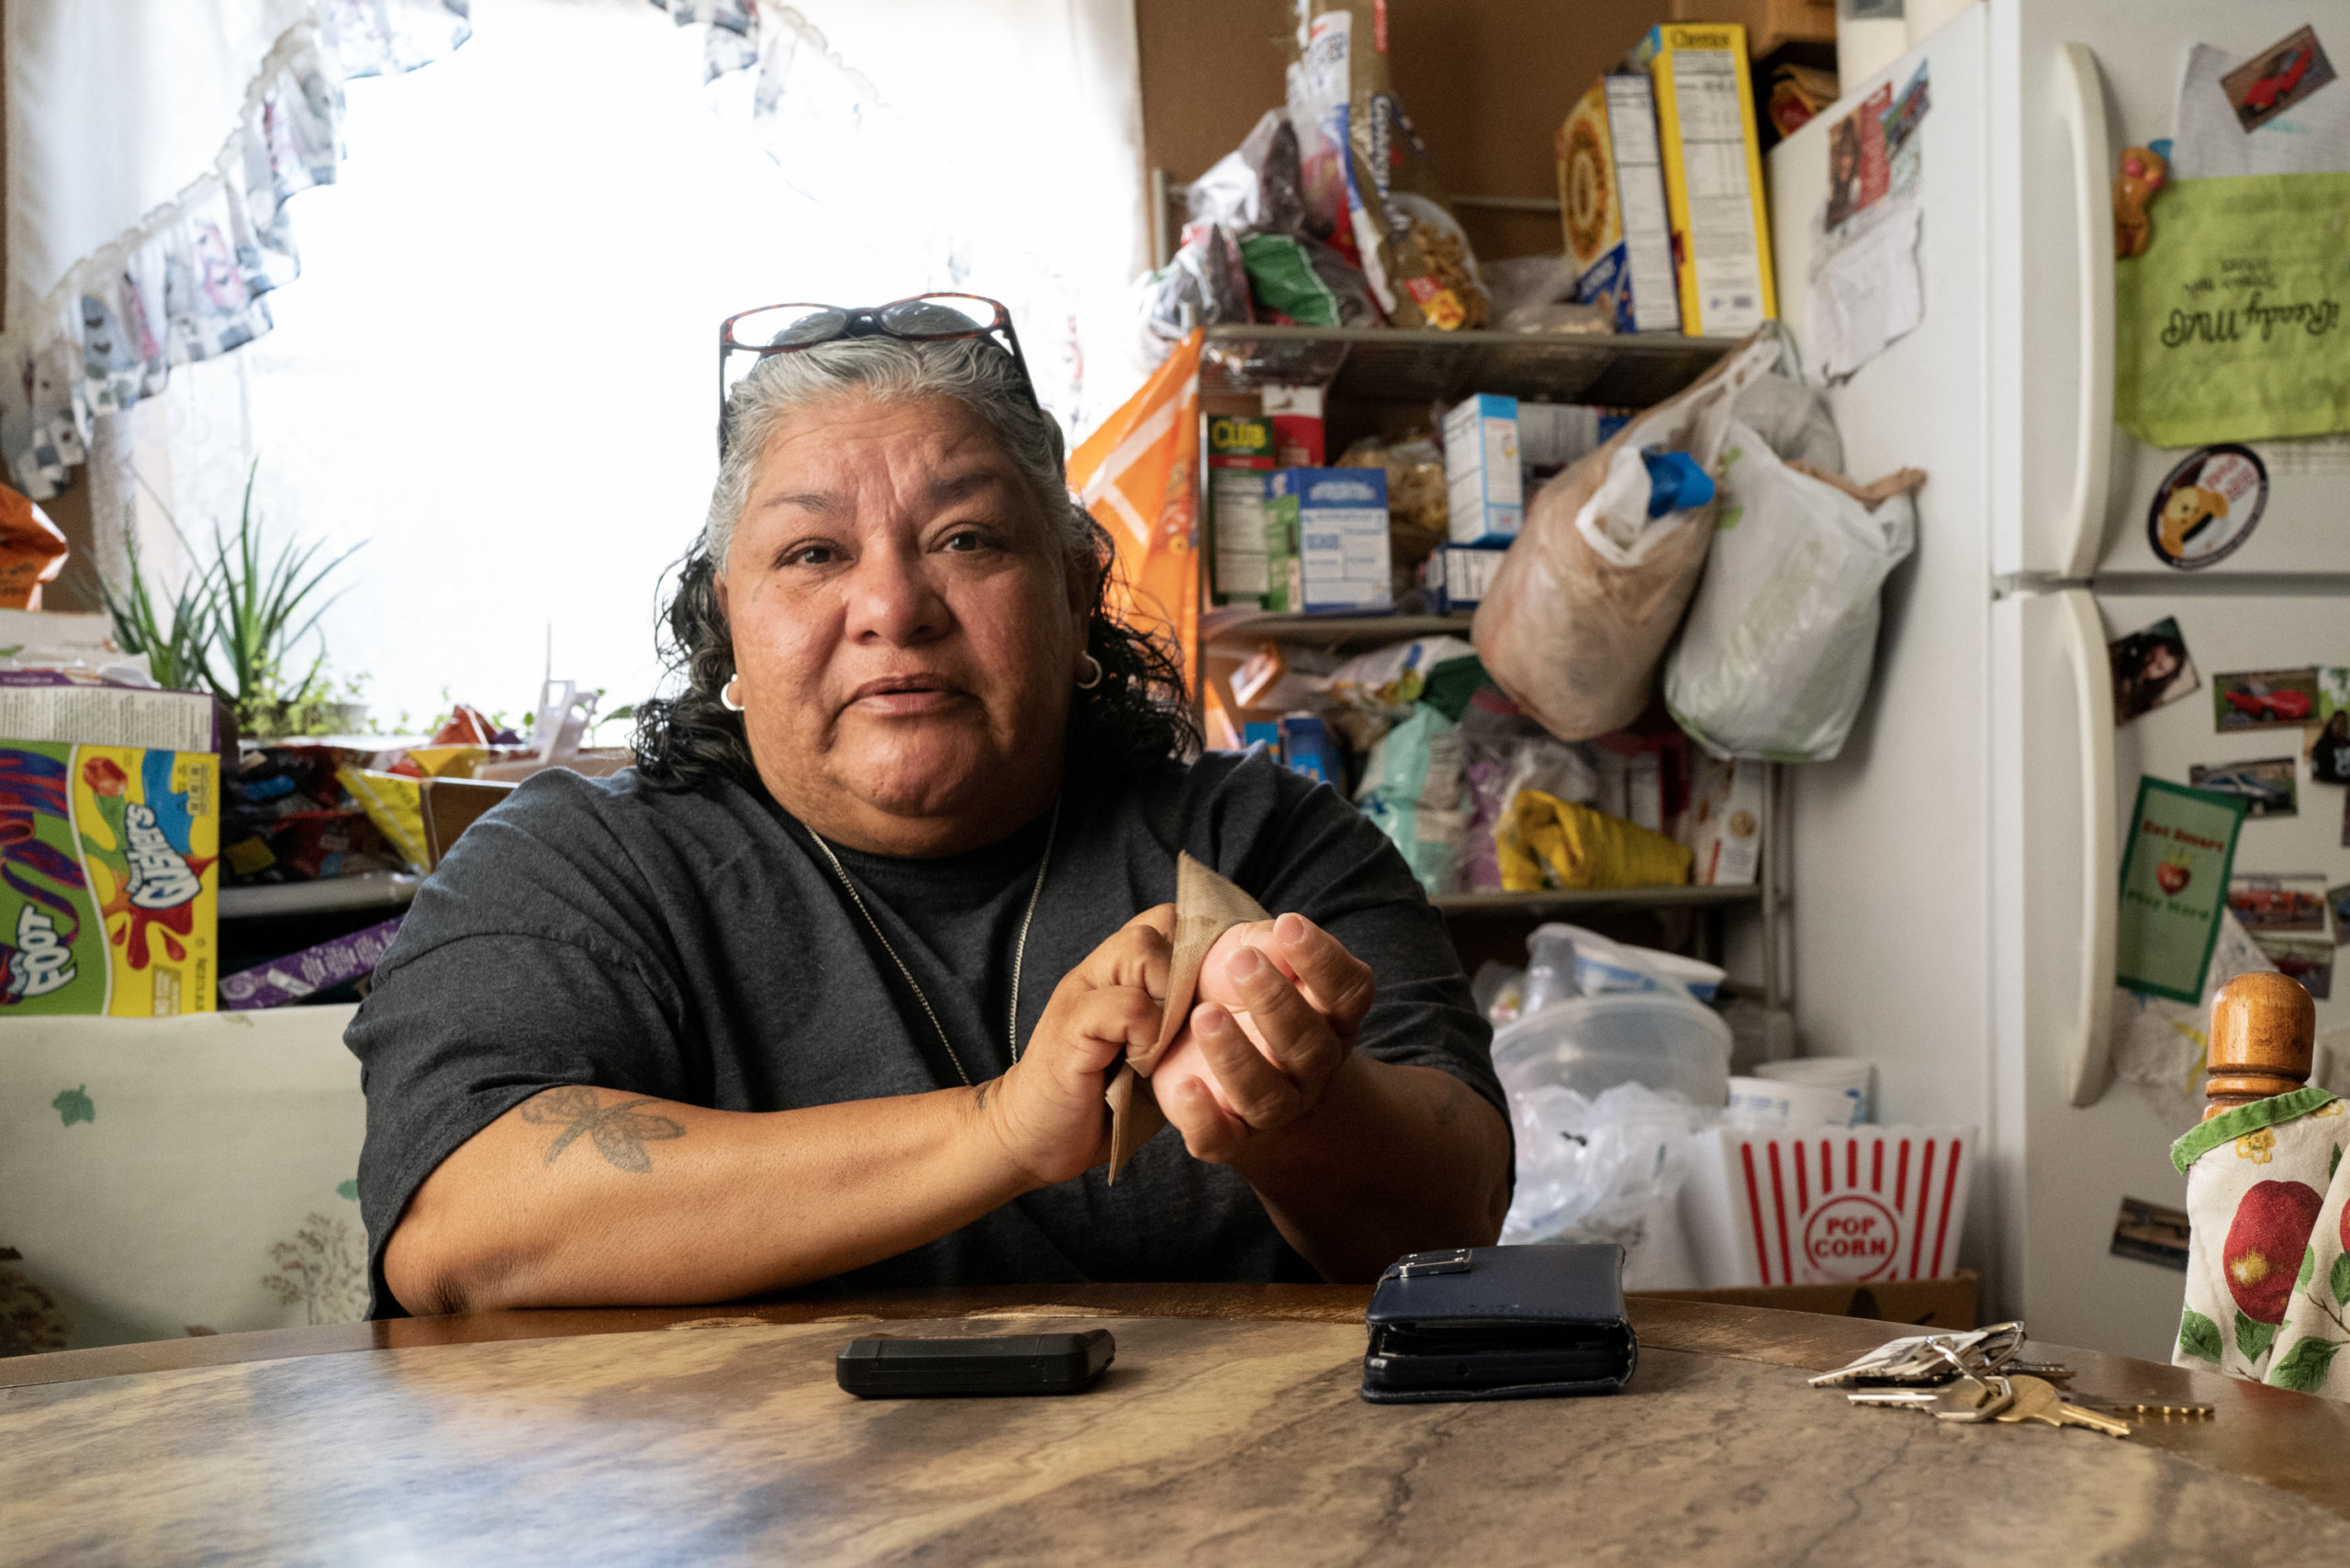 Section 8 tenants struggle to find homes in Albuquerque